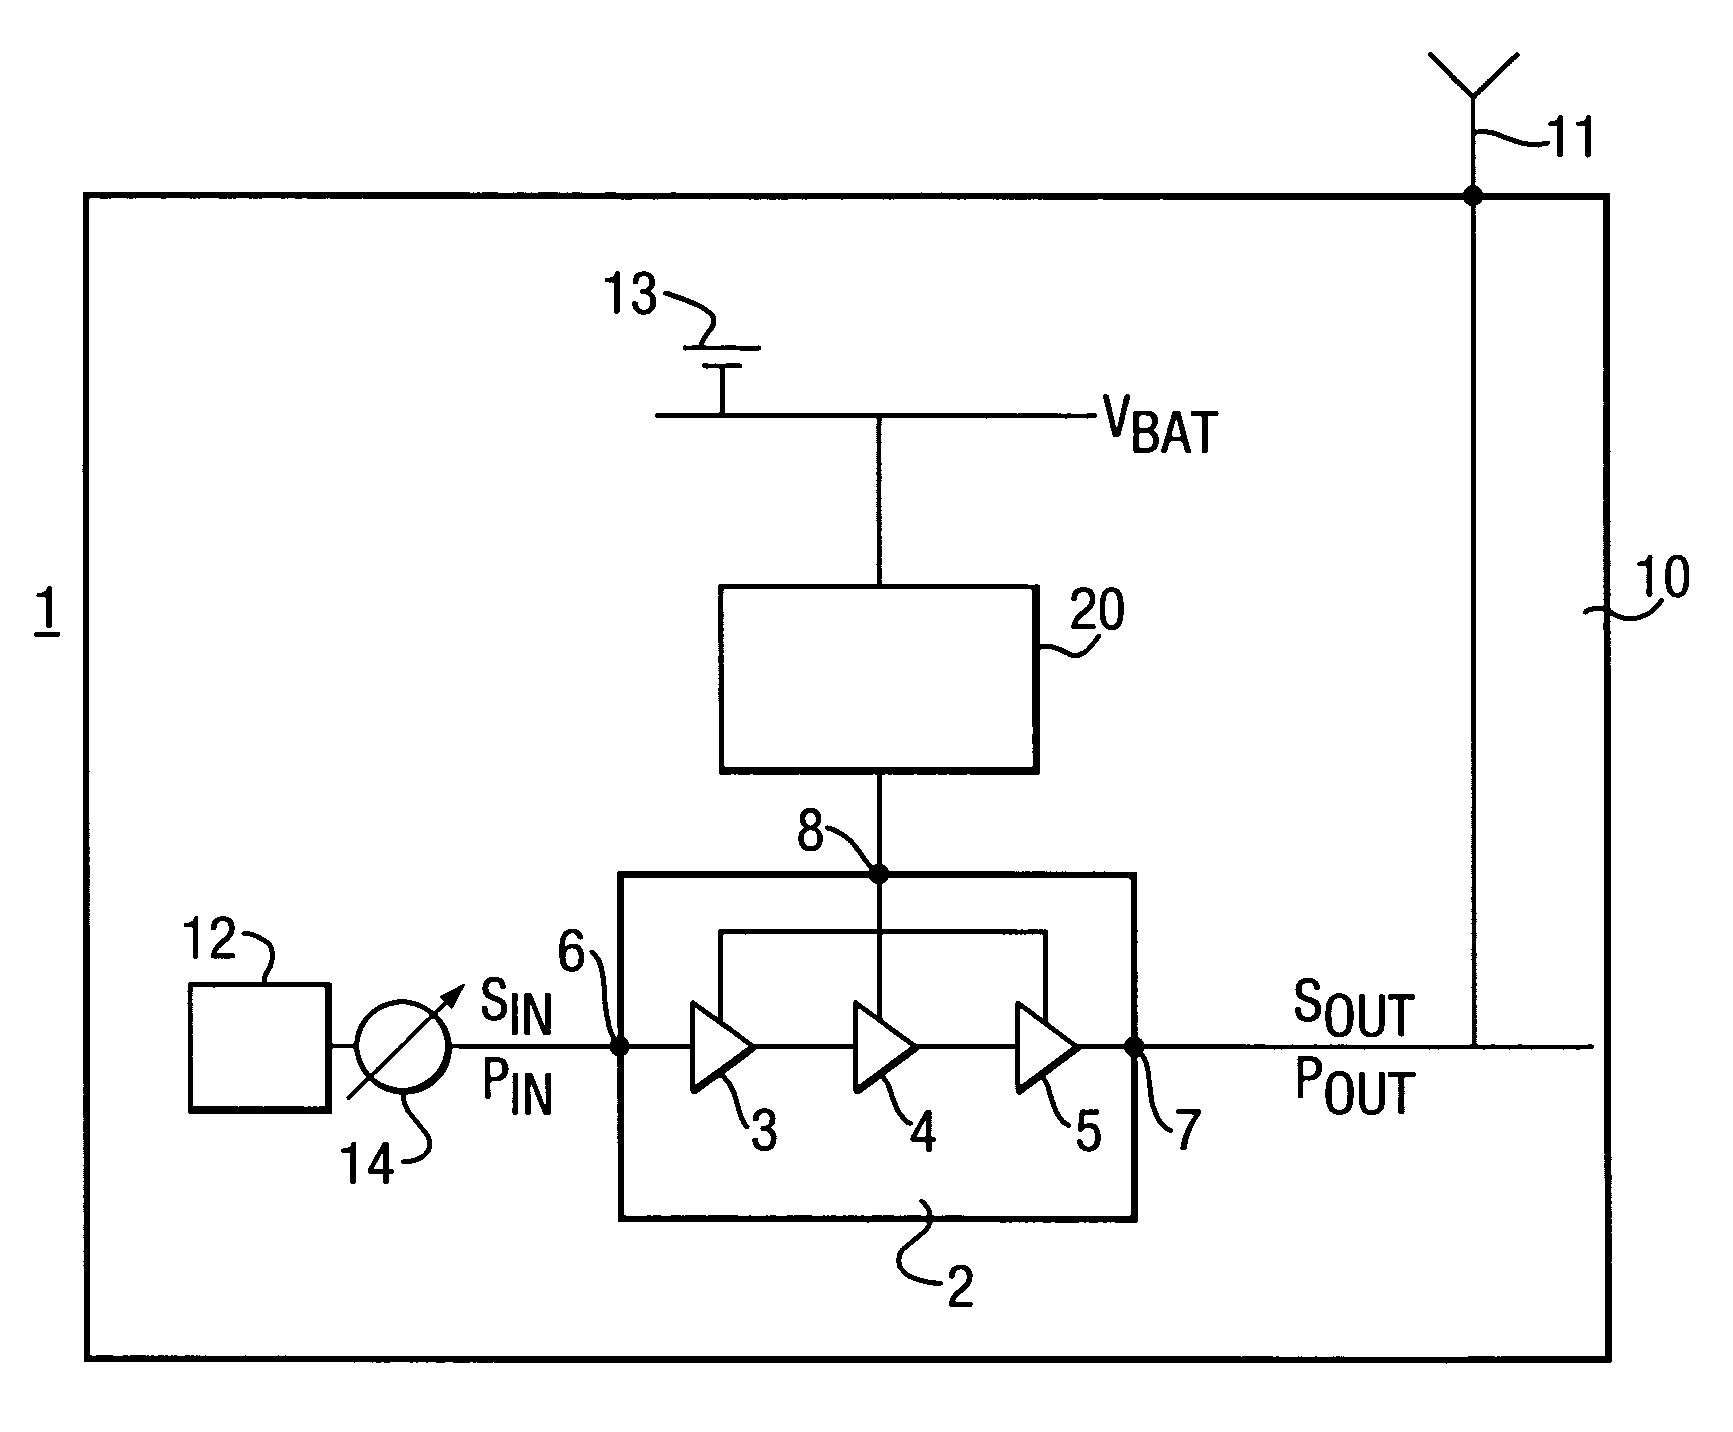 Power control of a power amplifier